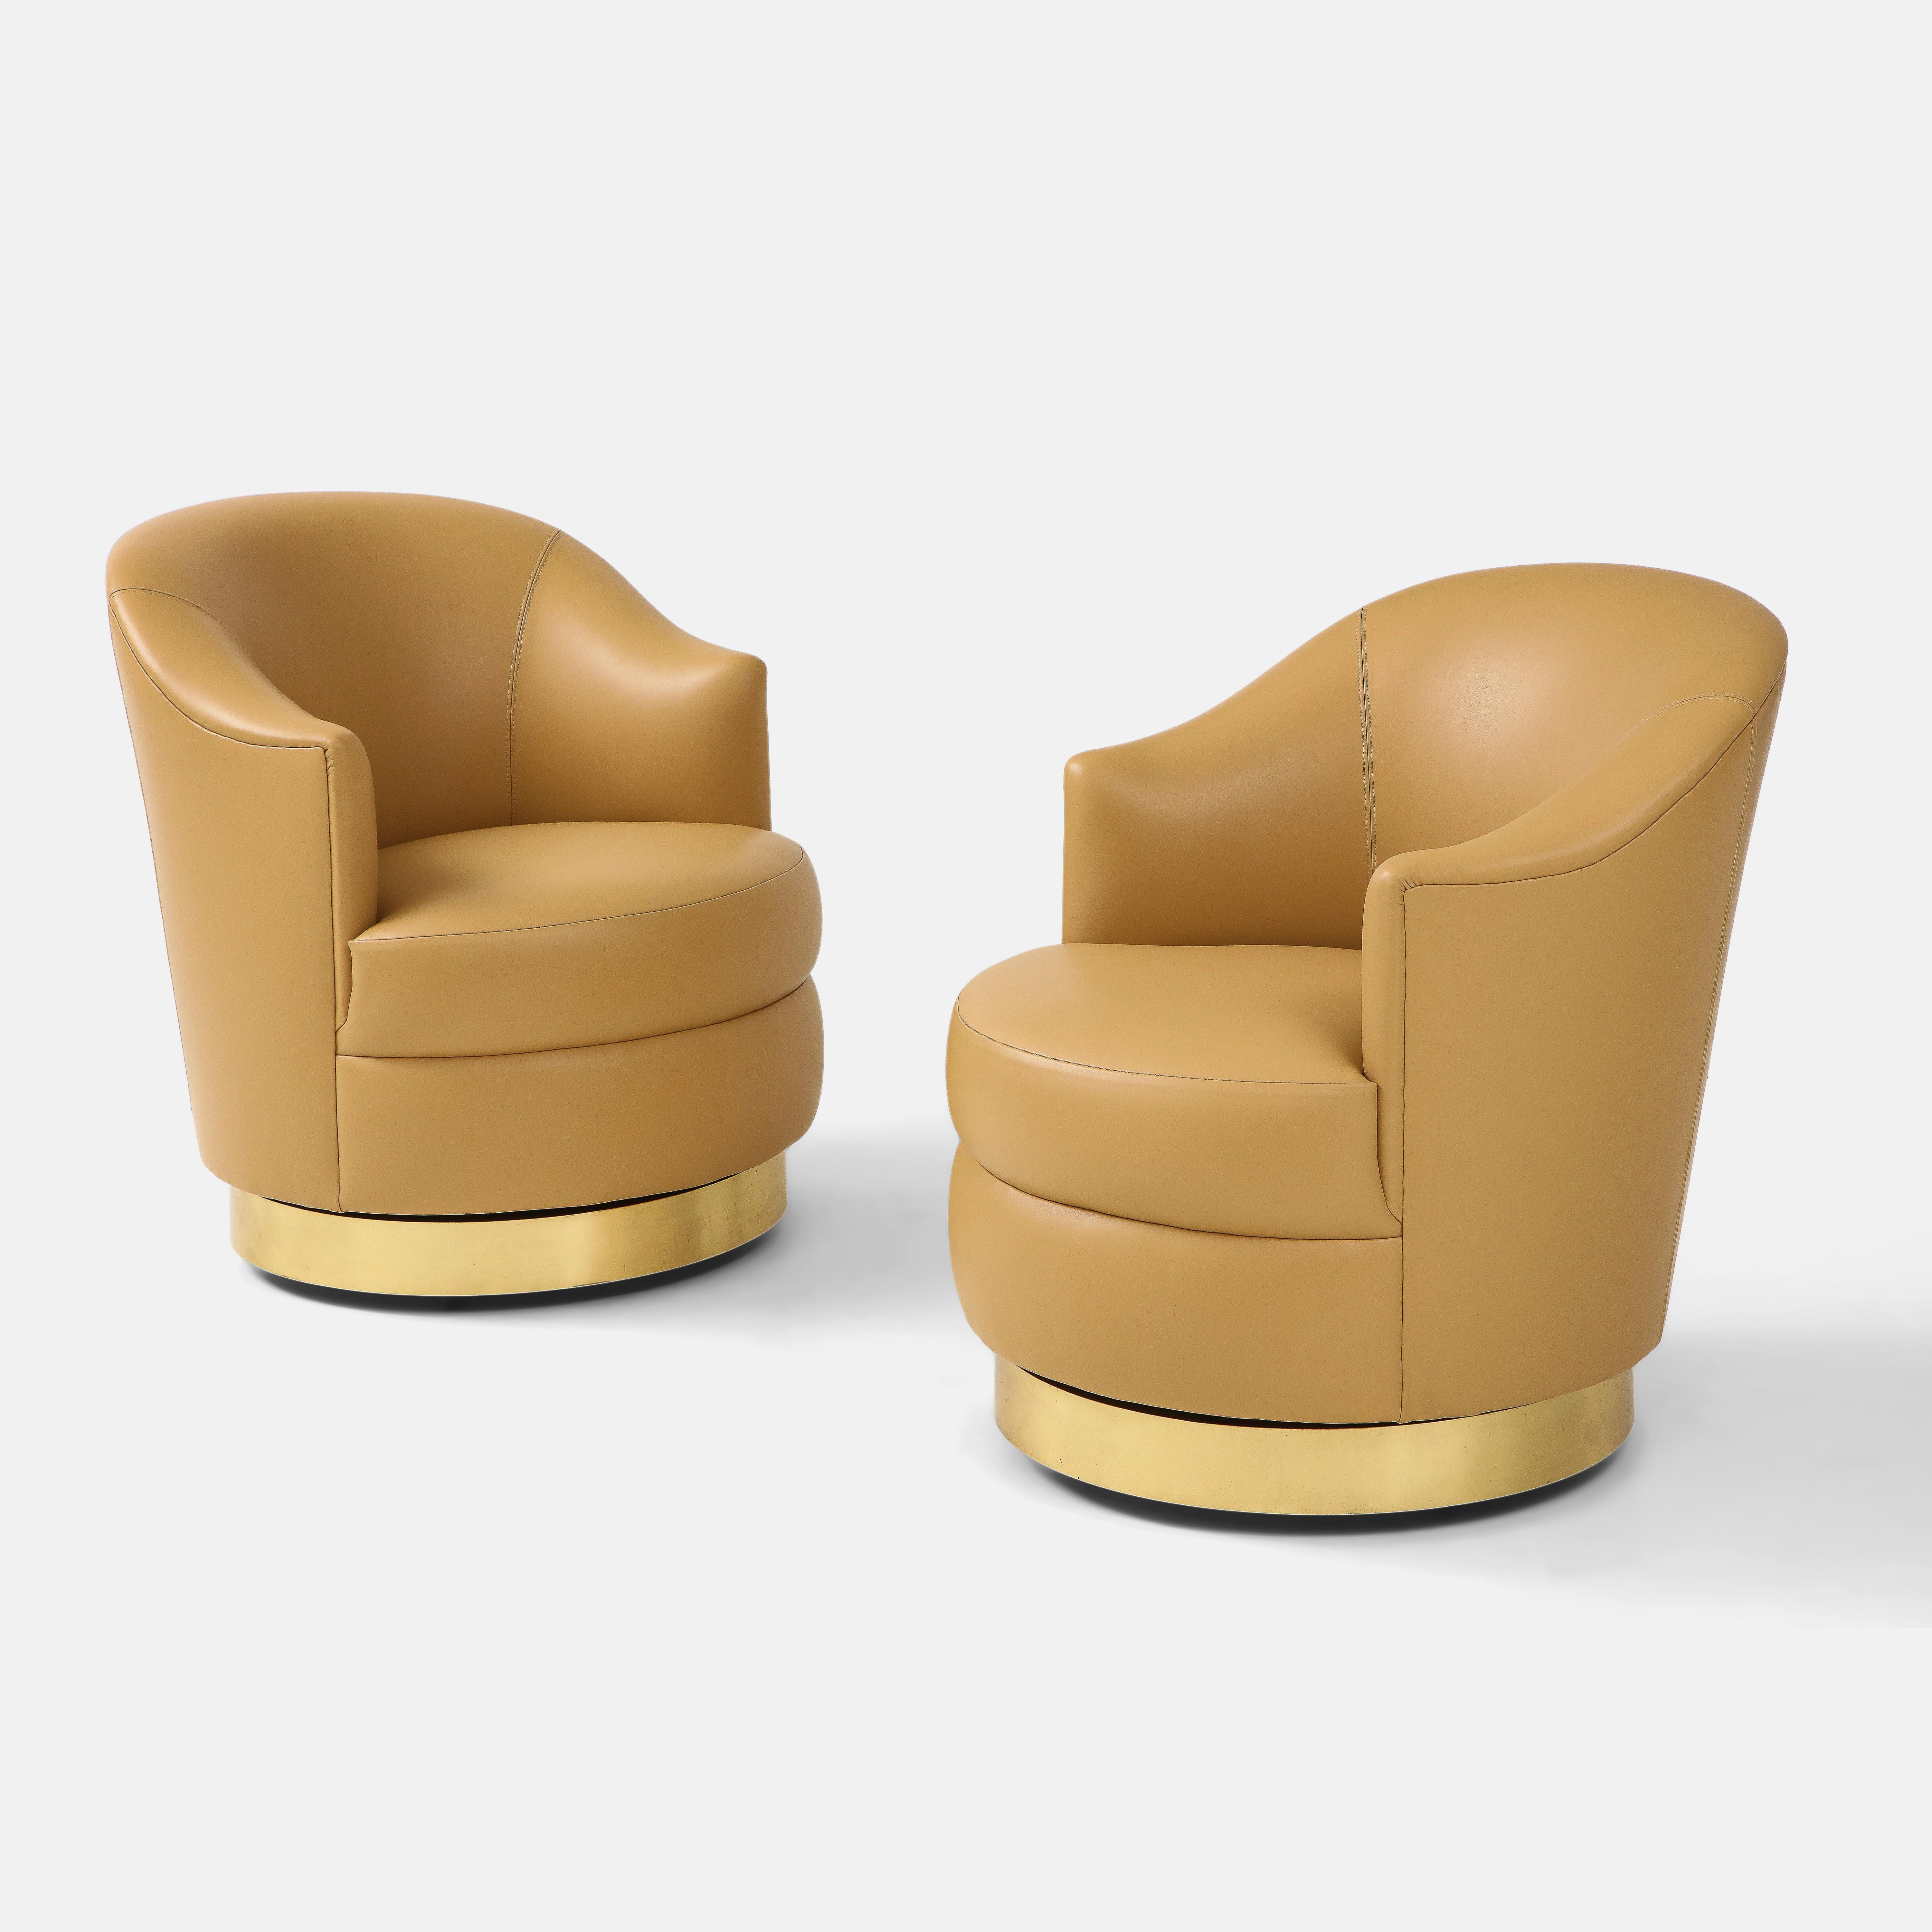 Karl Springer documented rare pair of swivel chairs in camel leather with brass bases, USA, 1980s. This incredibly chic pair of swivel chairs has been fully restored and newly reupholstered in Edelman camel leather. They have simple yet elegant